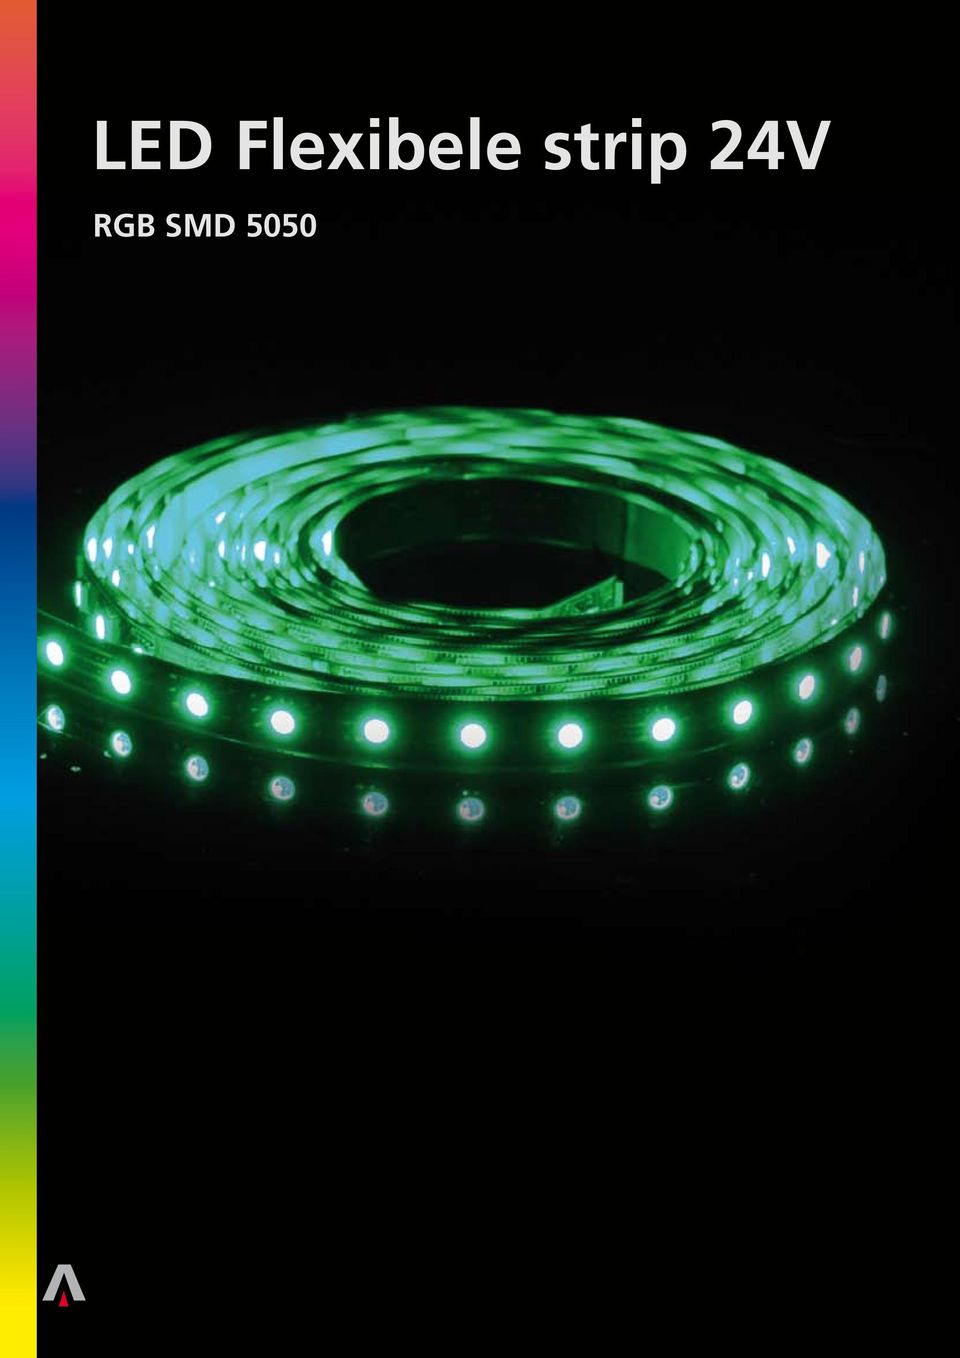 systeem SMD 5050 op basis